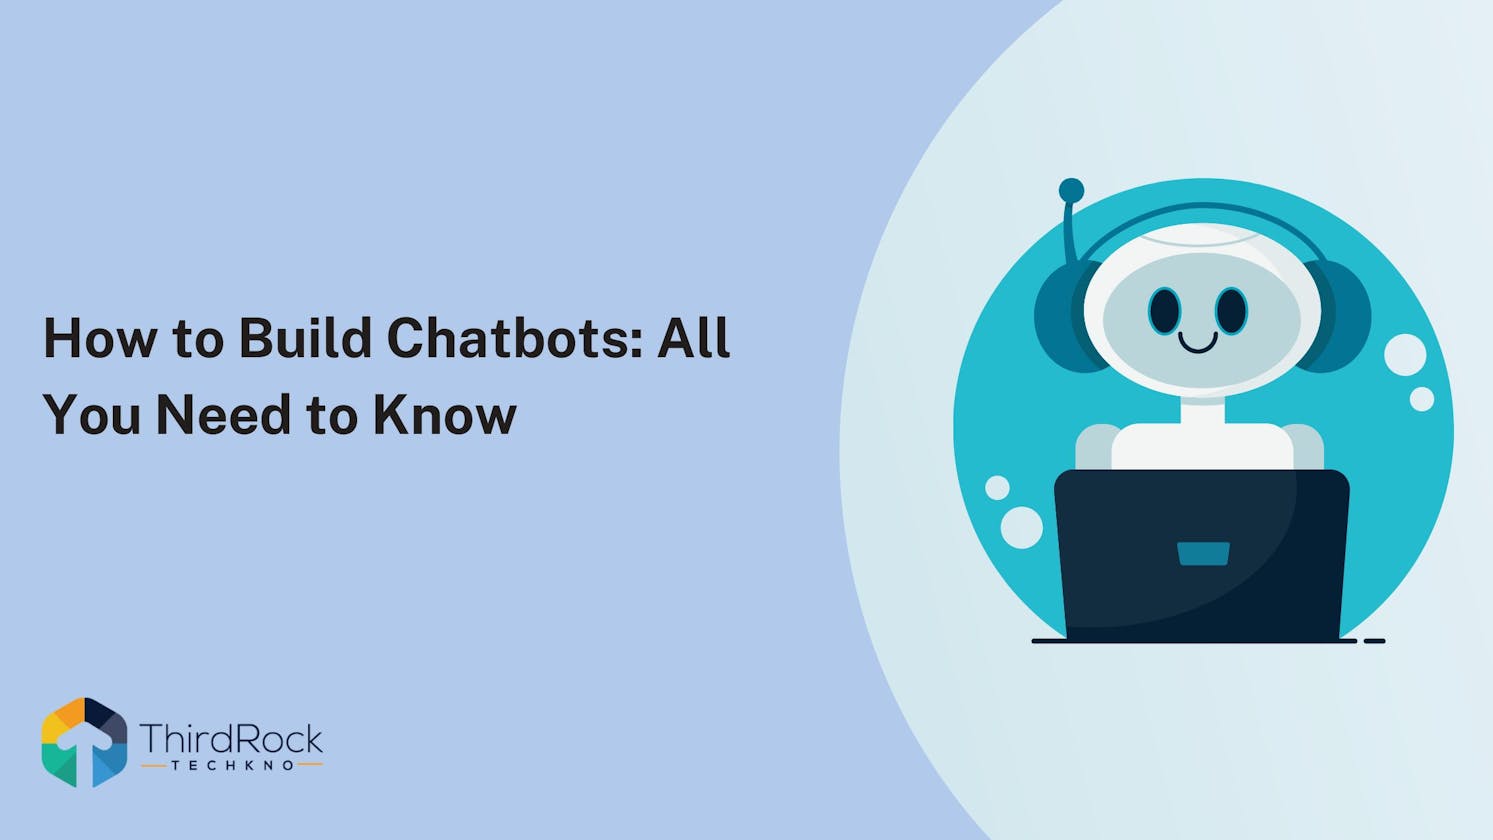 How to Build Chatbots: All You Need to Know